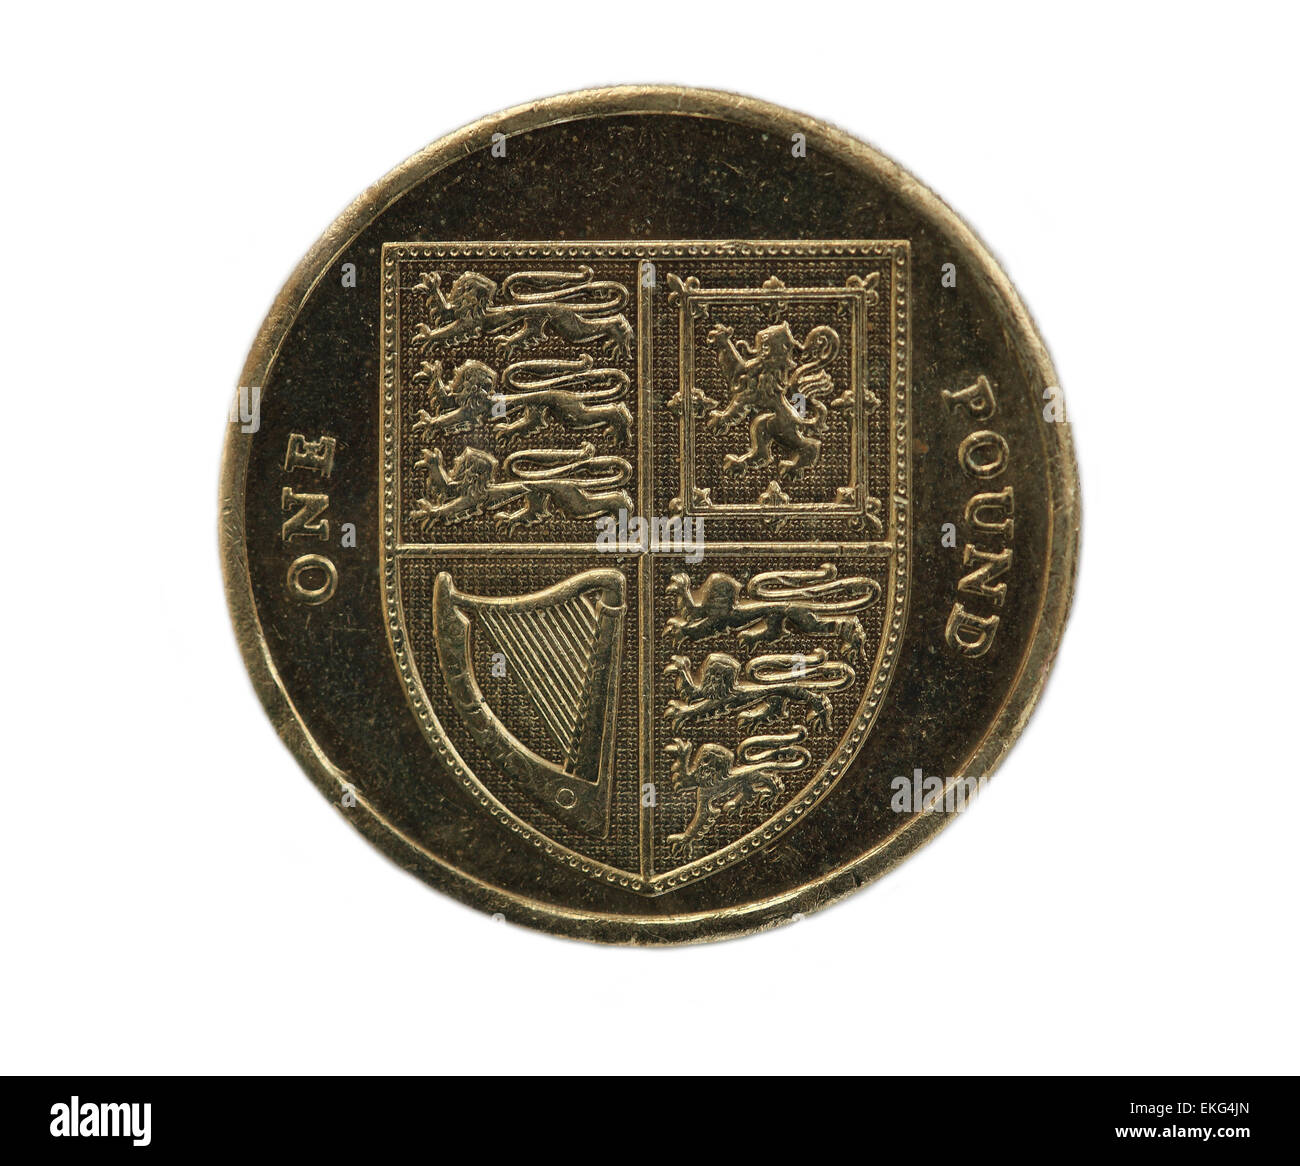 British One pound coin on a white background Stock Photo